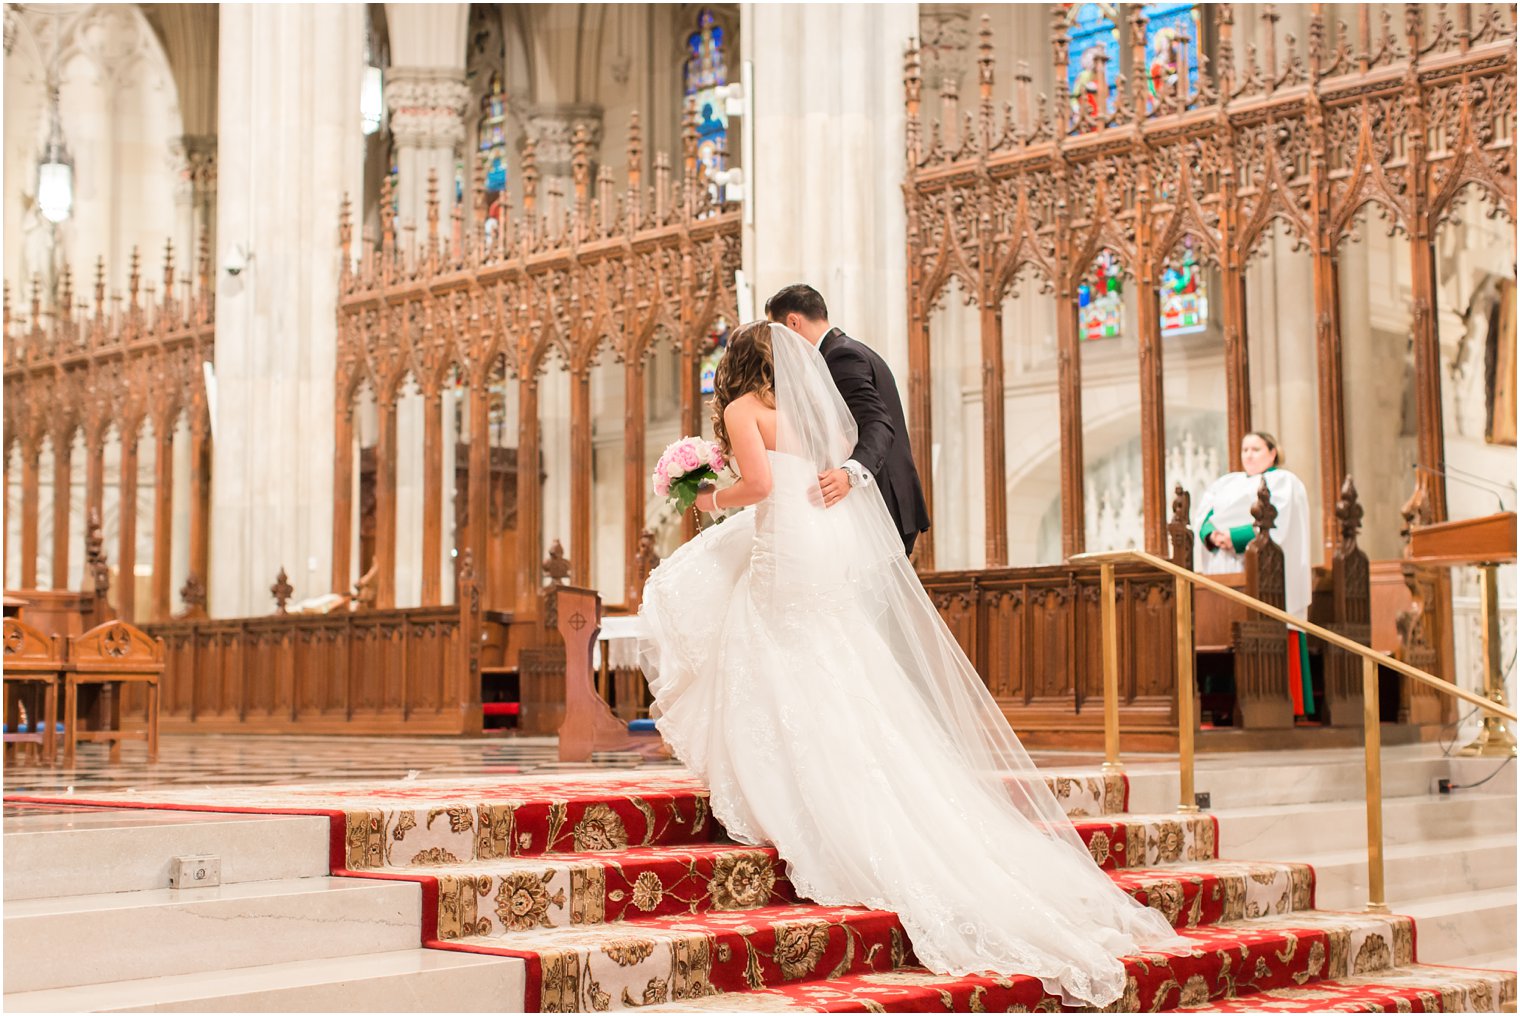 Bride and groom at altar at St. Patrick's Cathedral Wedding | Photo by Idalia Photography